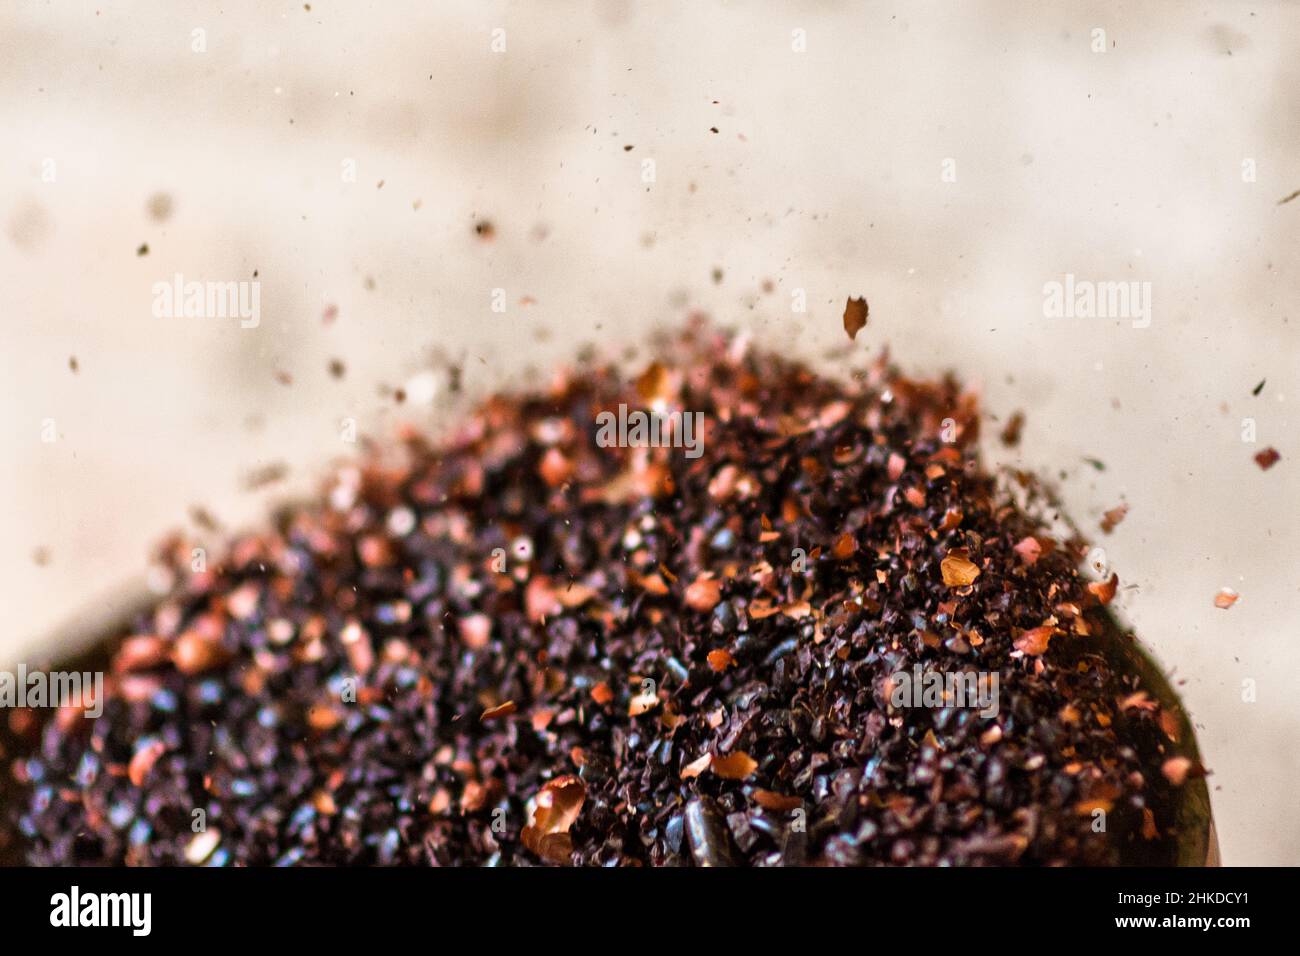 A winnowing bowl, full of crushed cacao beans tossed into the air, is seen being shaked in artisanal chocolate manufacture in Xochistlahuaca, Mexico. Stock Photo